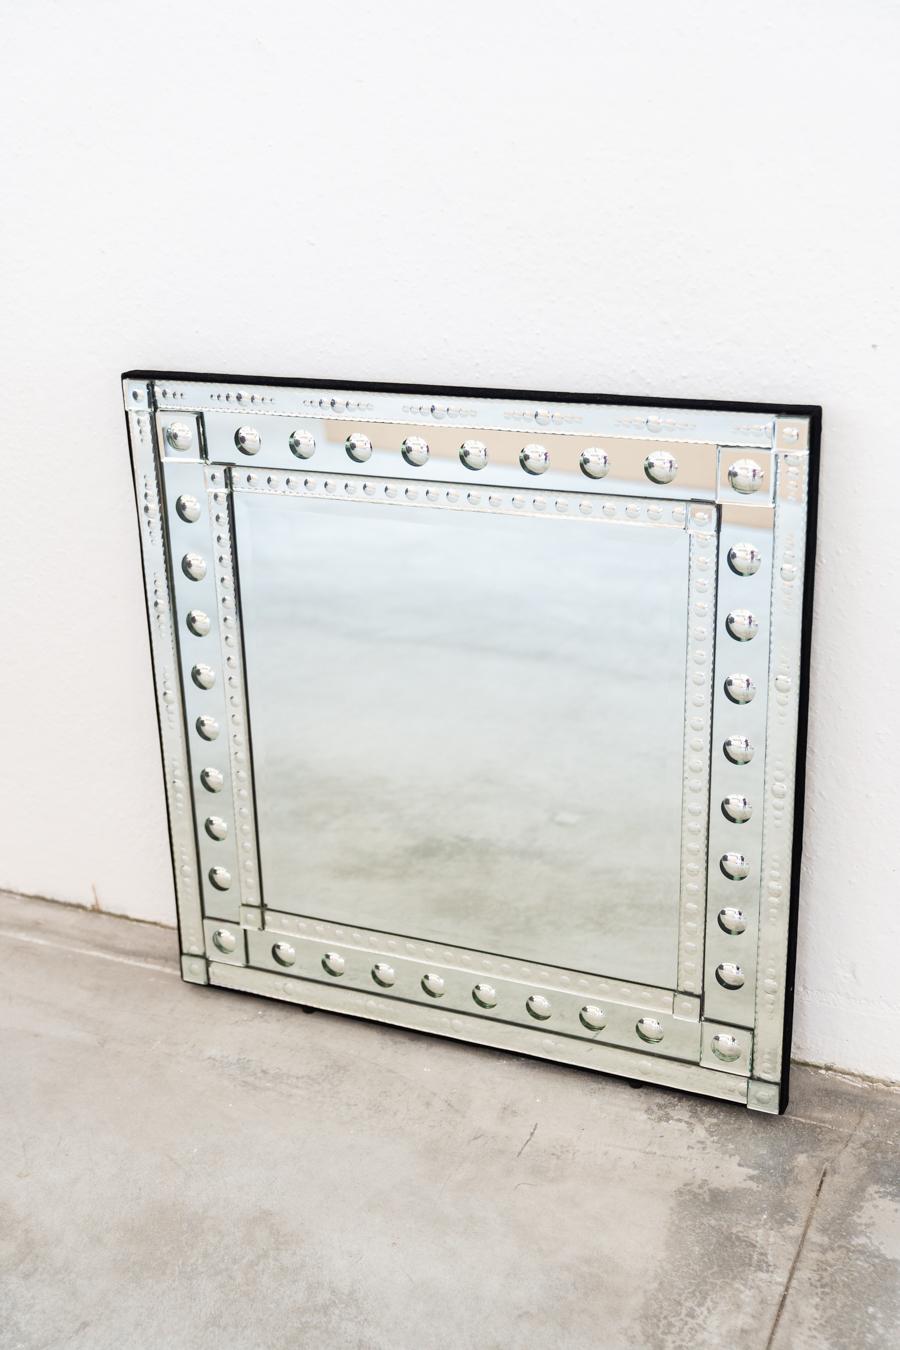 Square decorative wall mirror, 1970-1979
With fashion design and easy installation, elegant and simple square shaped mirror. The edge is in microfilm. Made of glass and crystal, wooden frame to ensure better stability and quality. It is suitable for